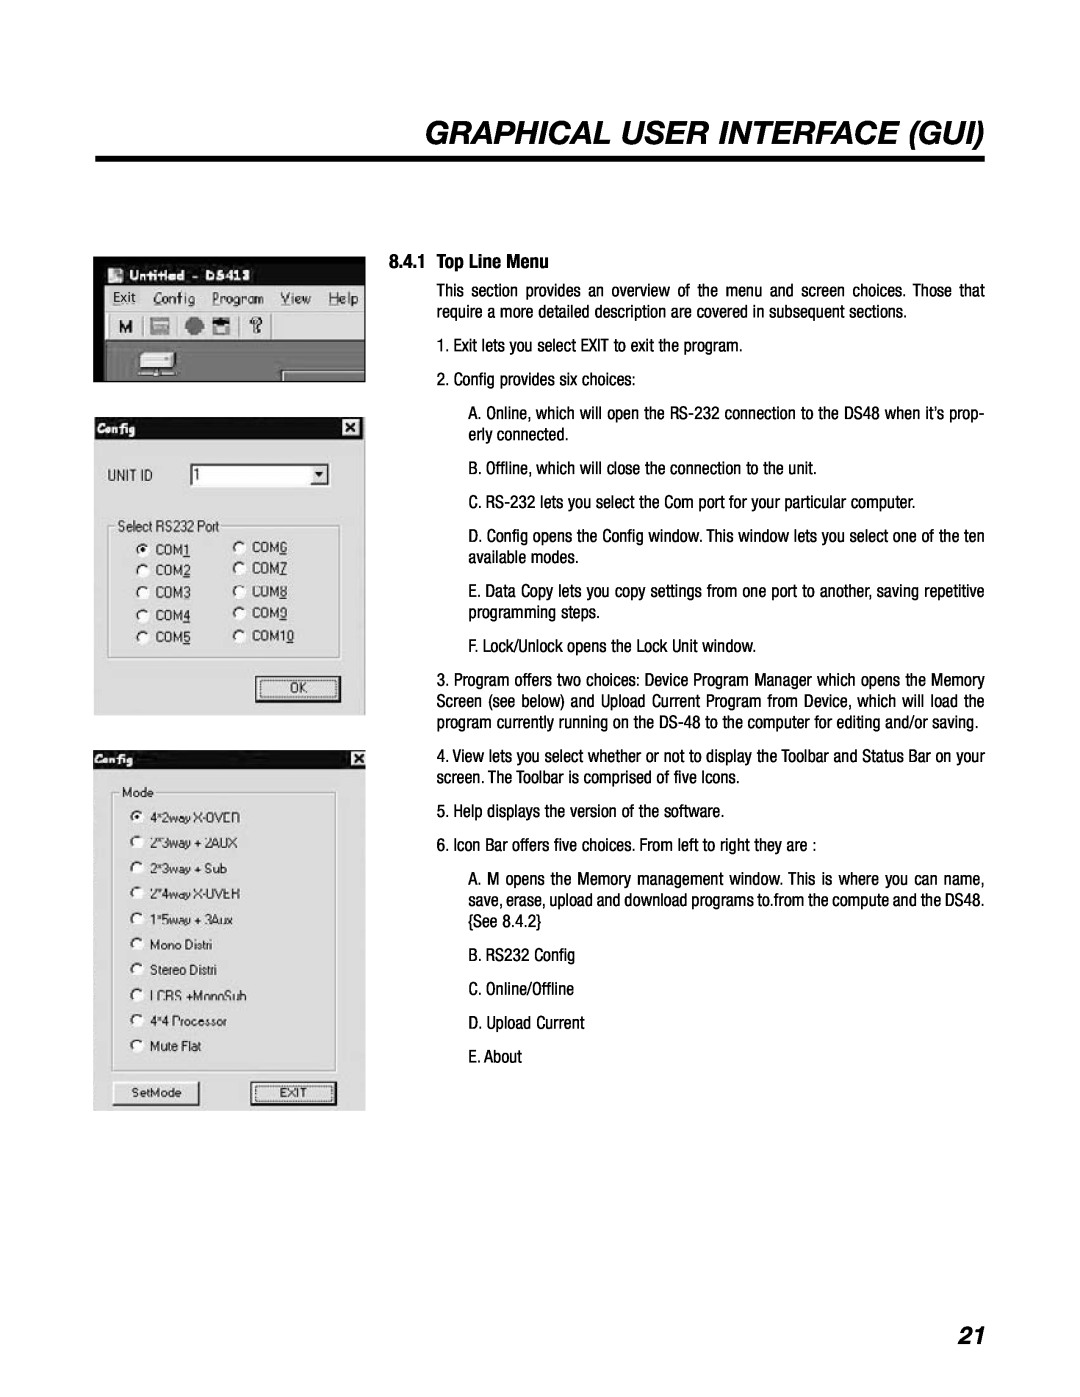 BBE DS48 manual Graphical User Interface Gui, 8.4.1Top Line Menu 